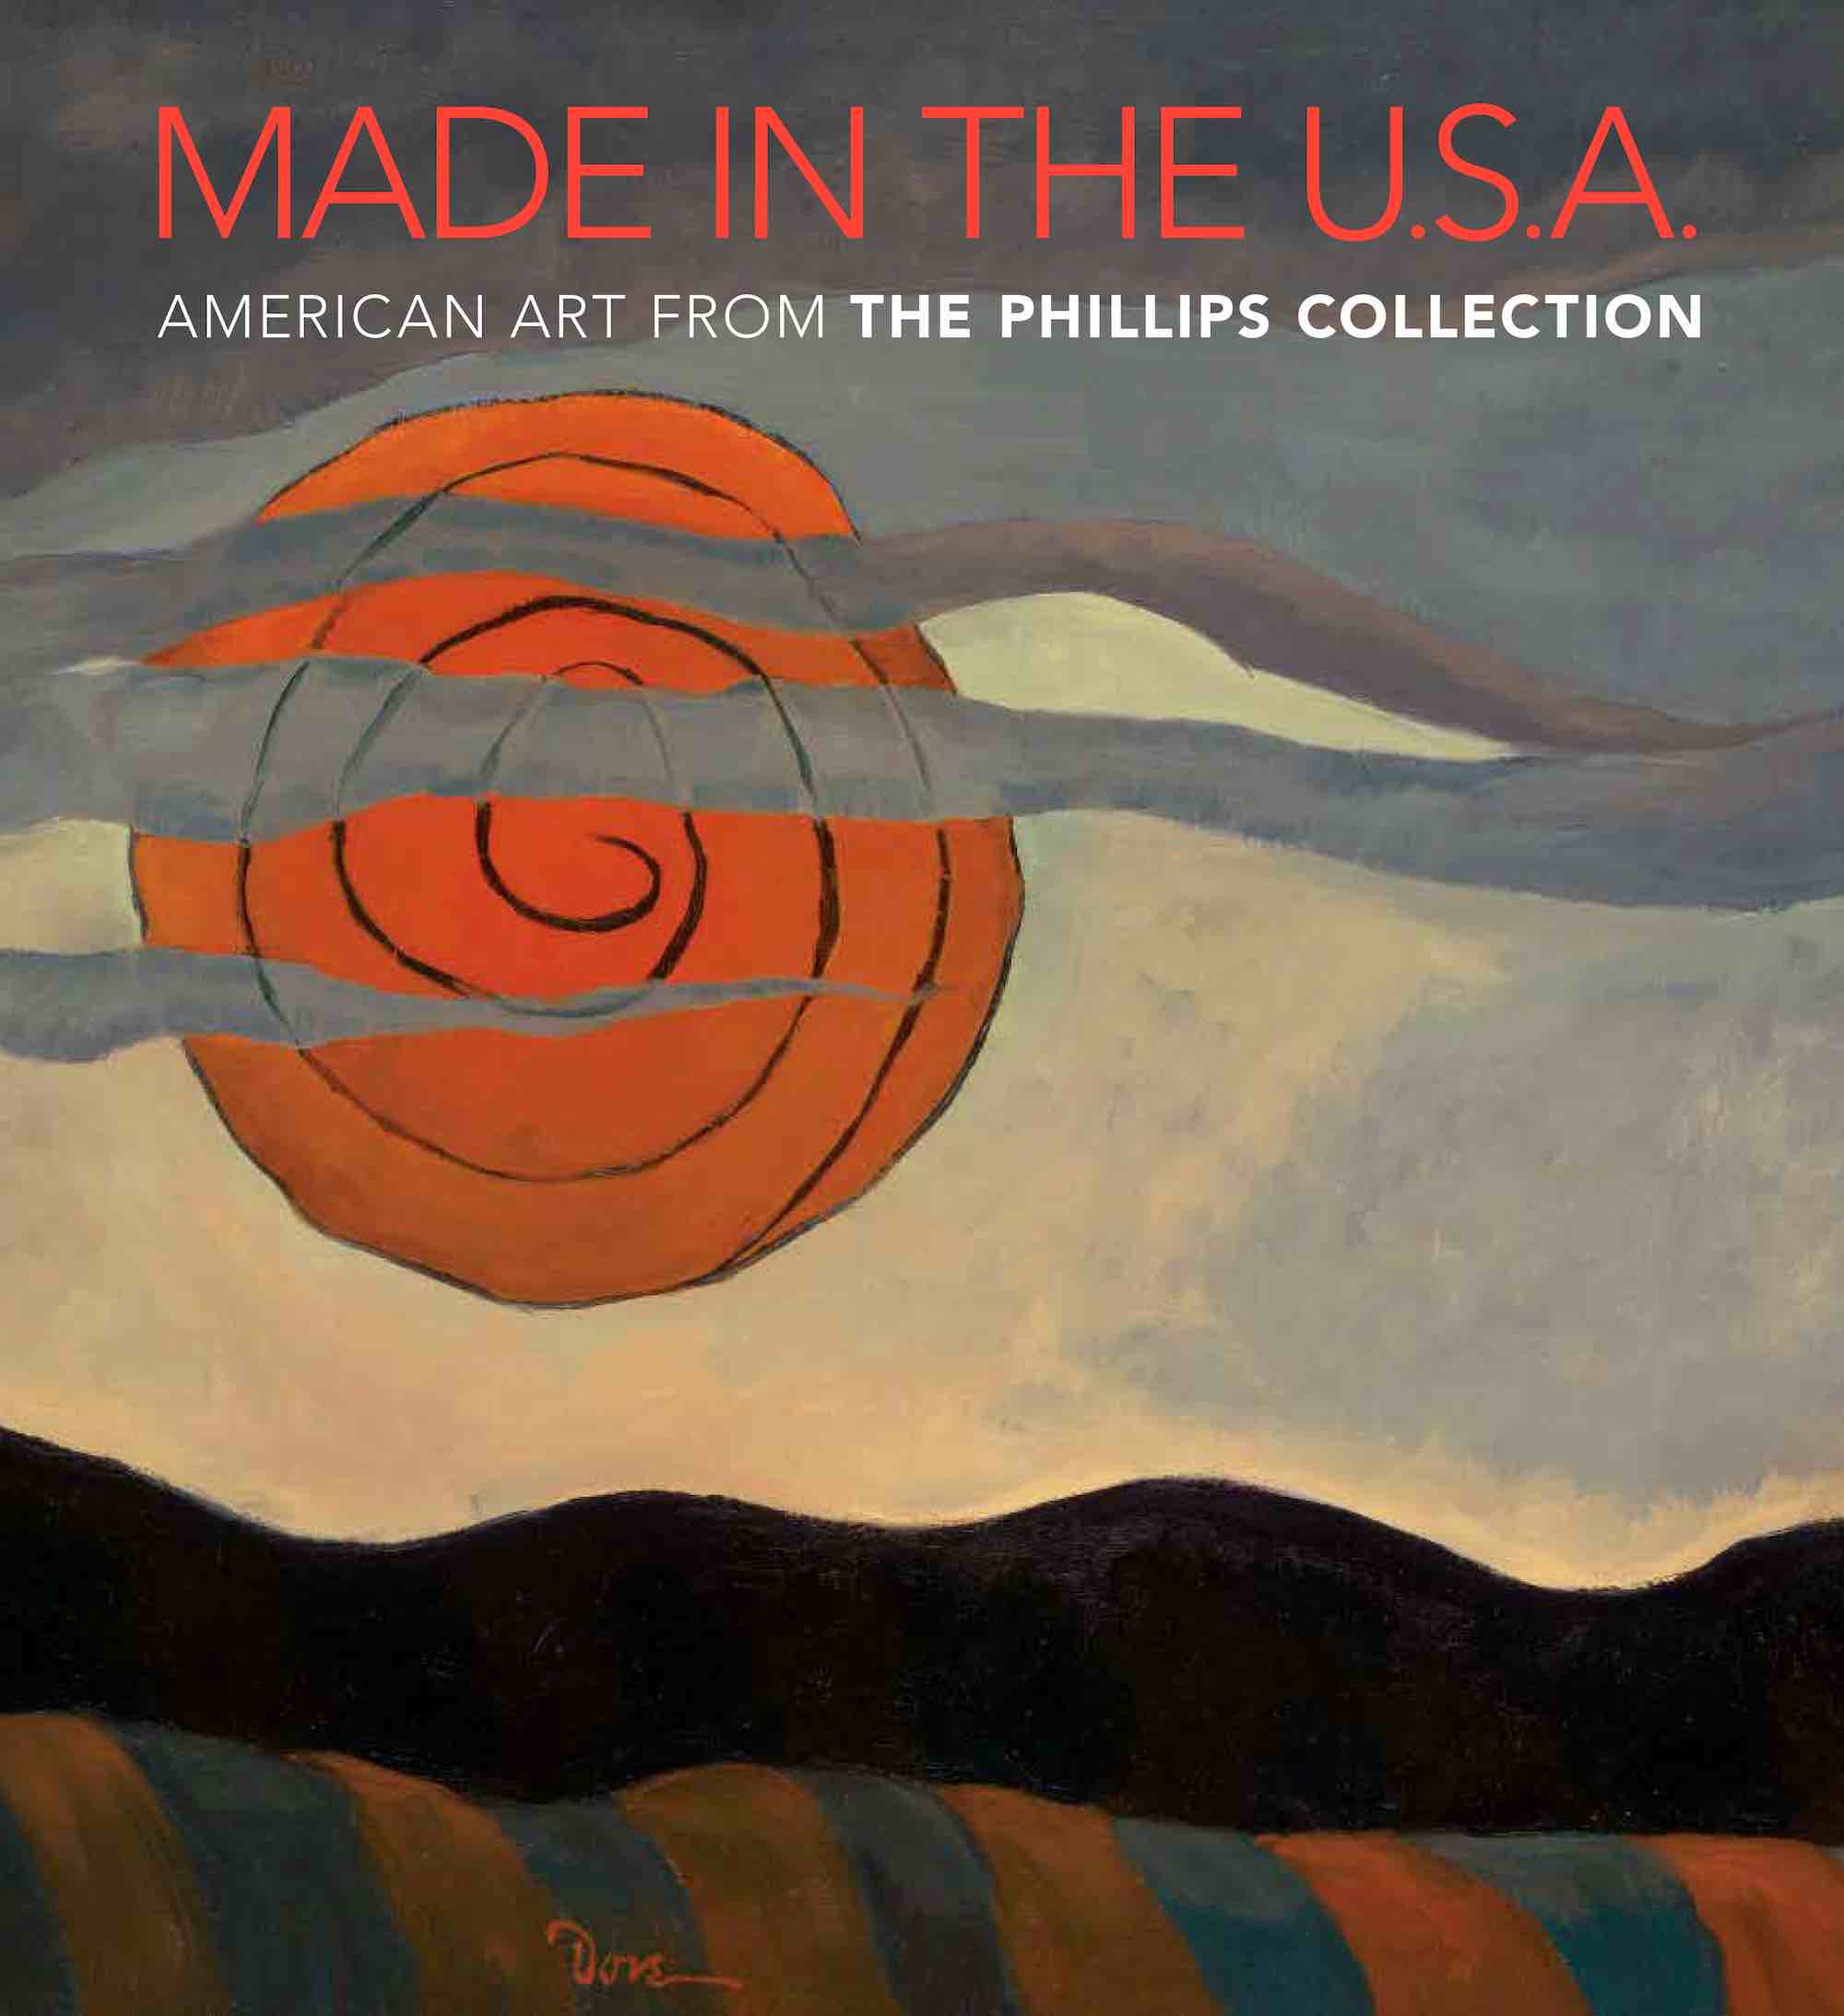 Susan Behrends Frank, Made in the U.S.A.: American Art from The Phillips Collection. Yale University Press.